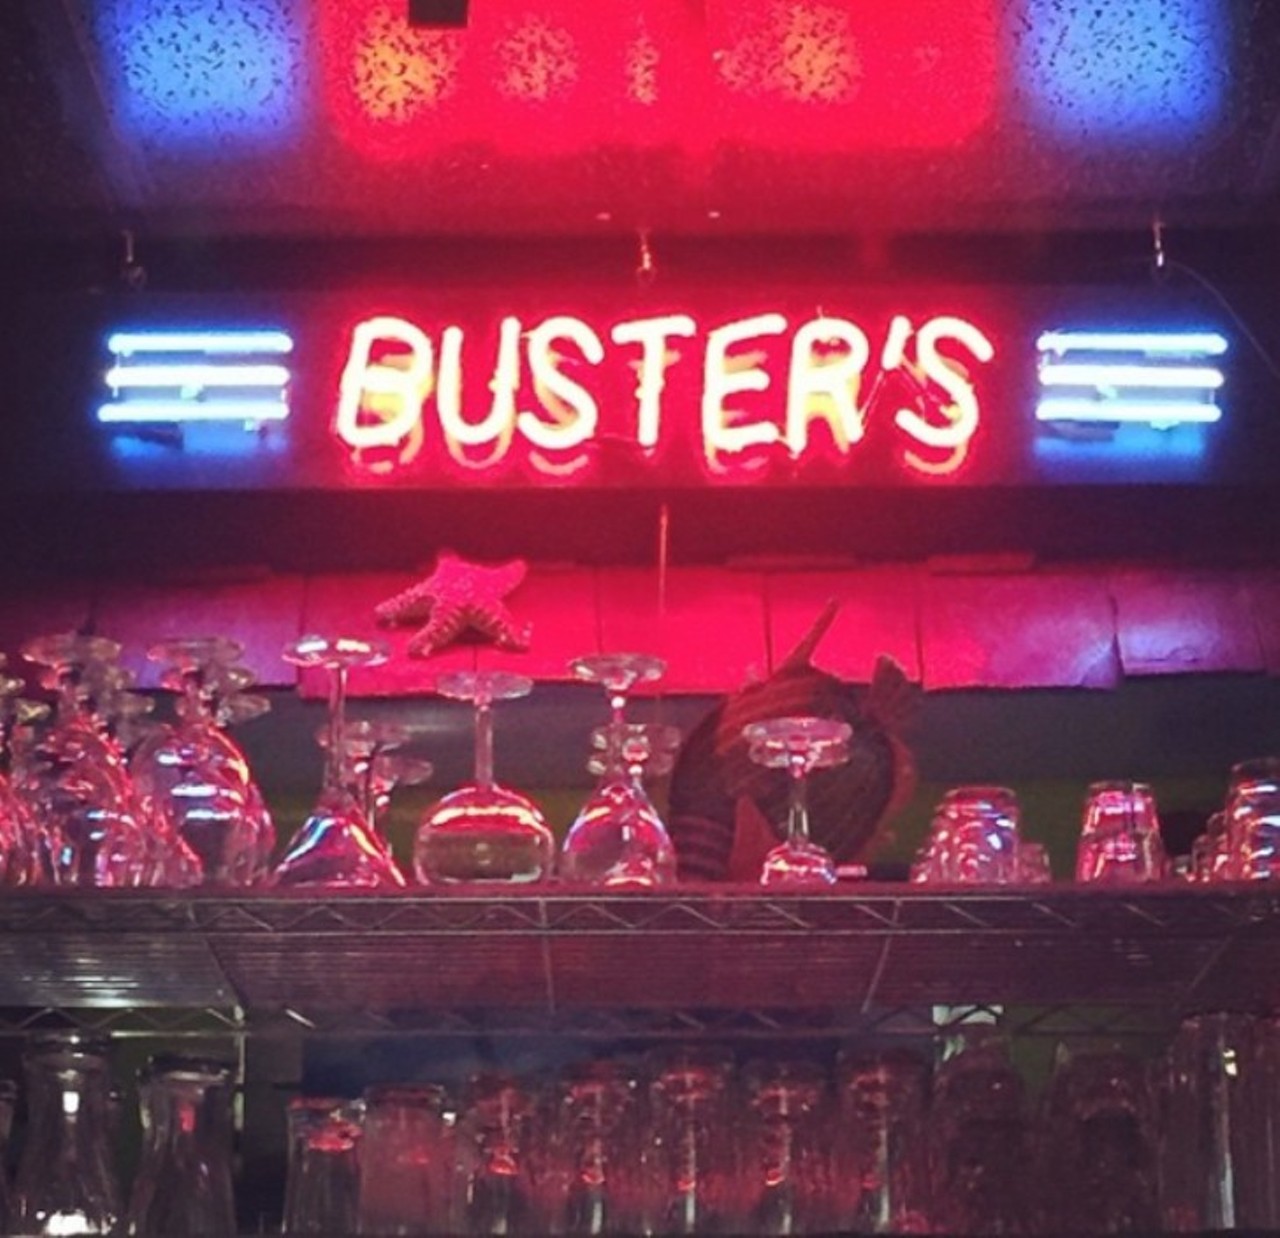 Buster&#146;s Place
5784 W. Jefferson Ave., Trenton 
Bust out some rock and roll on Buster&#146;s jukebox and munch on a basket of fried pretzels at this hidden trove in Trenton. Their burger specials and draughts will totally put Buster&#146;s on your map. 
Photo by  @jentrussell